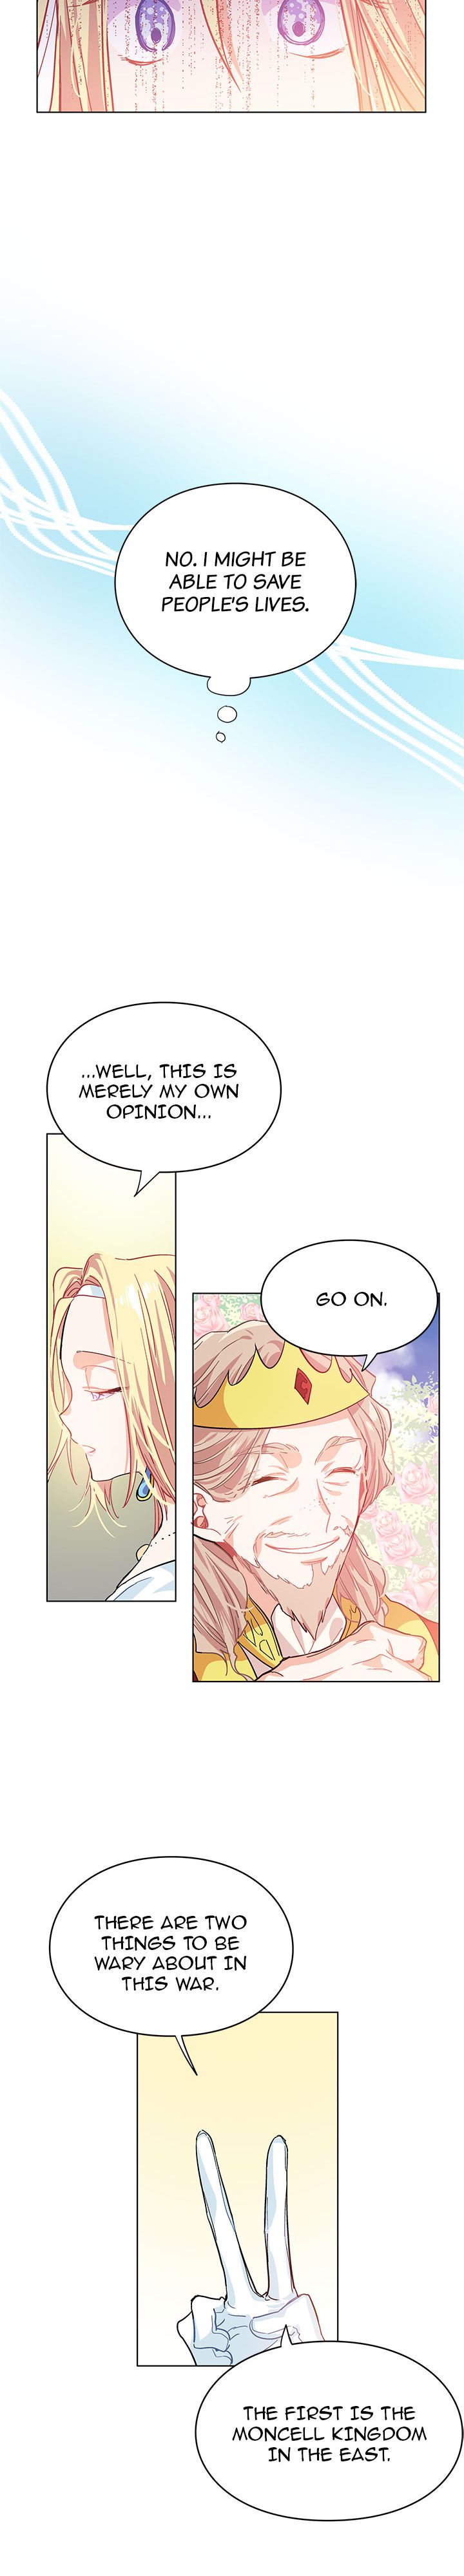 Doctor Elise – The Royal Lady with the Lamp - Chapter 7 Page 12